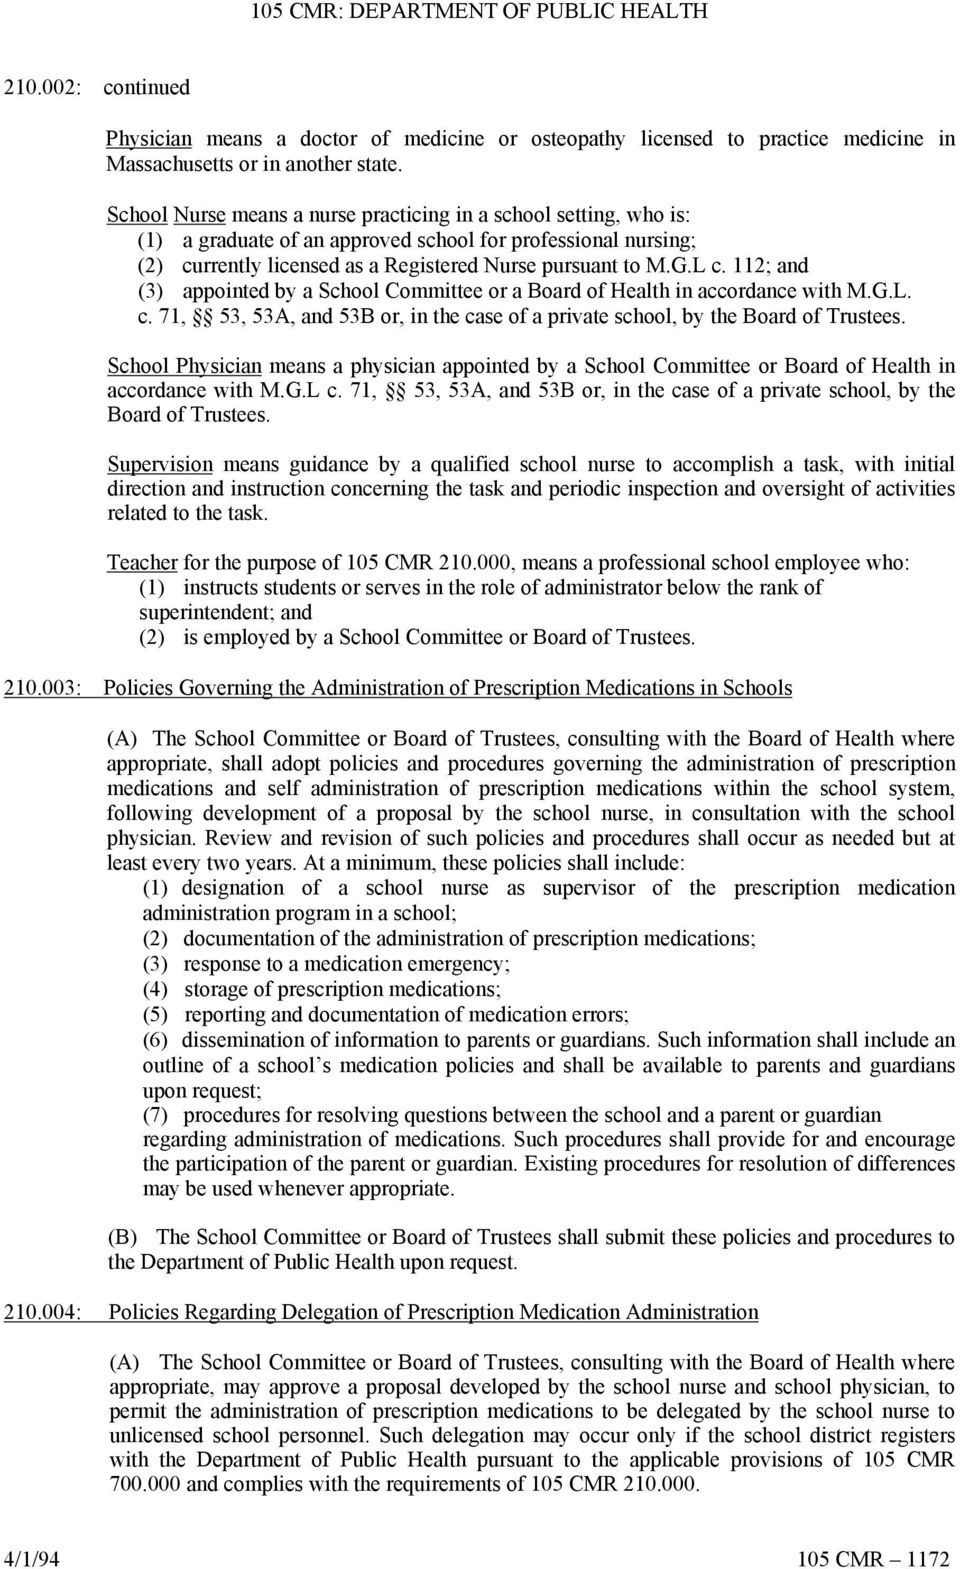 112; and (3) appointed by a School Committee or a Board of Health in accordance with M.G.L. c. 71, 53, 53A, and 53B or, in the case of a private school, by the Board of Trustees.